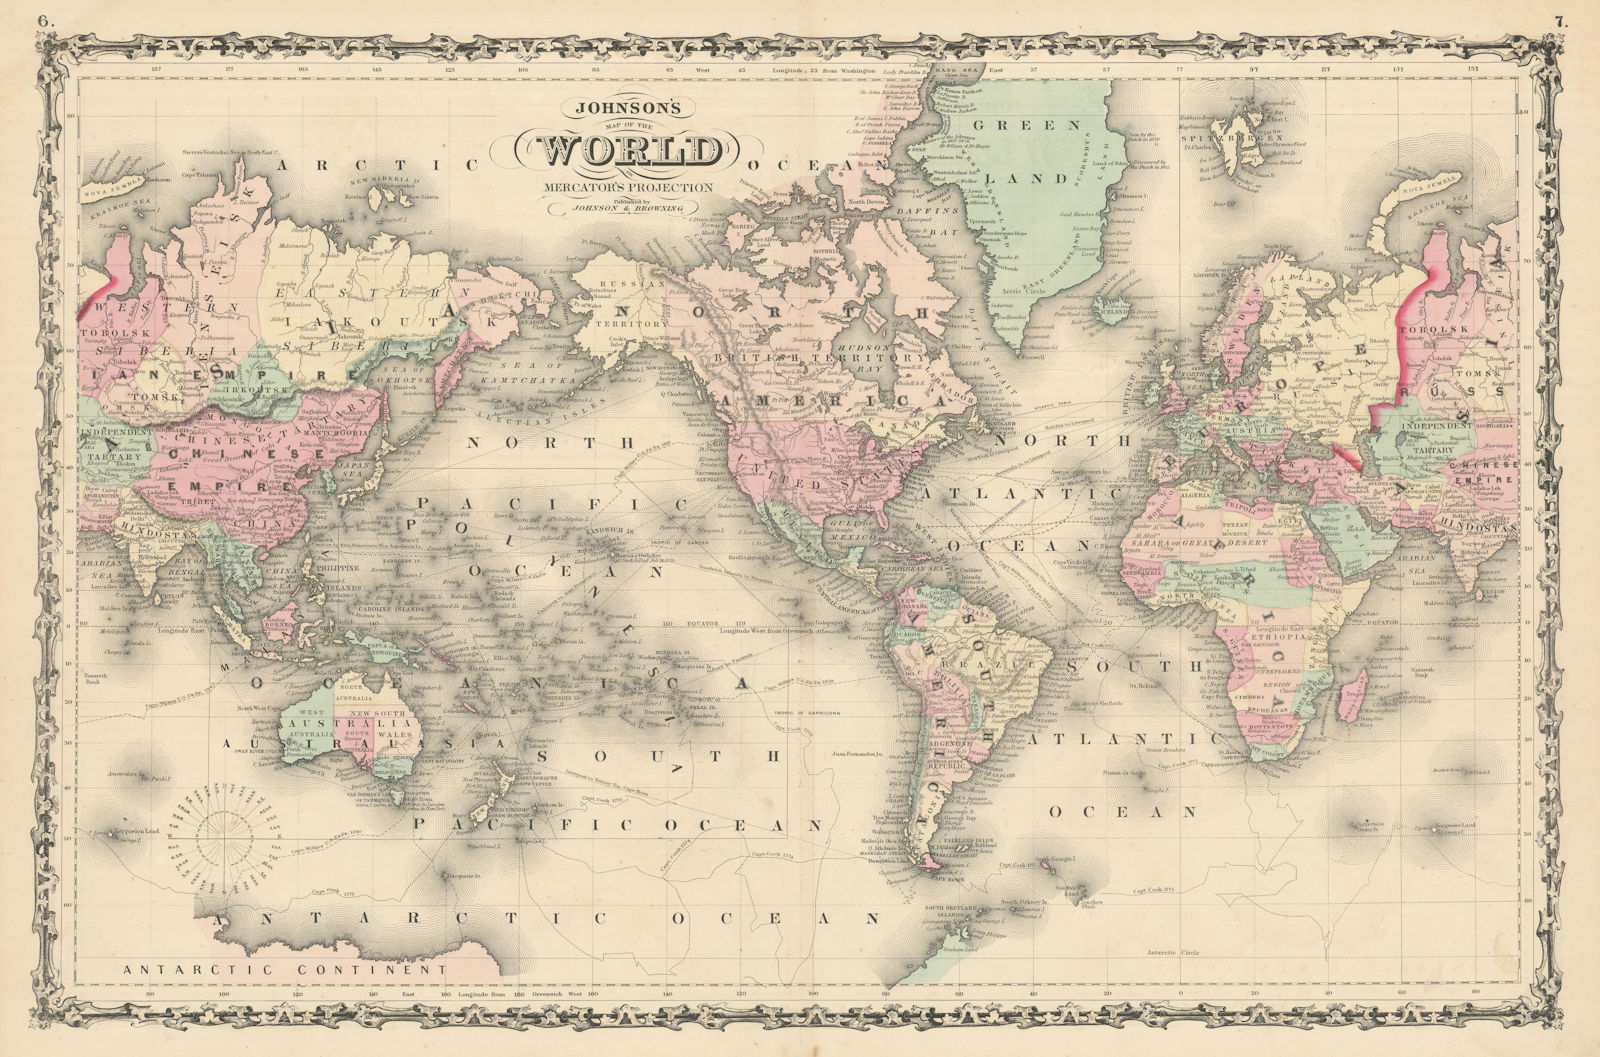 Johnson's World on Mercator's Projection. Americas-centric 1861 old map